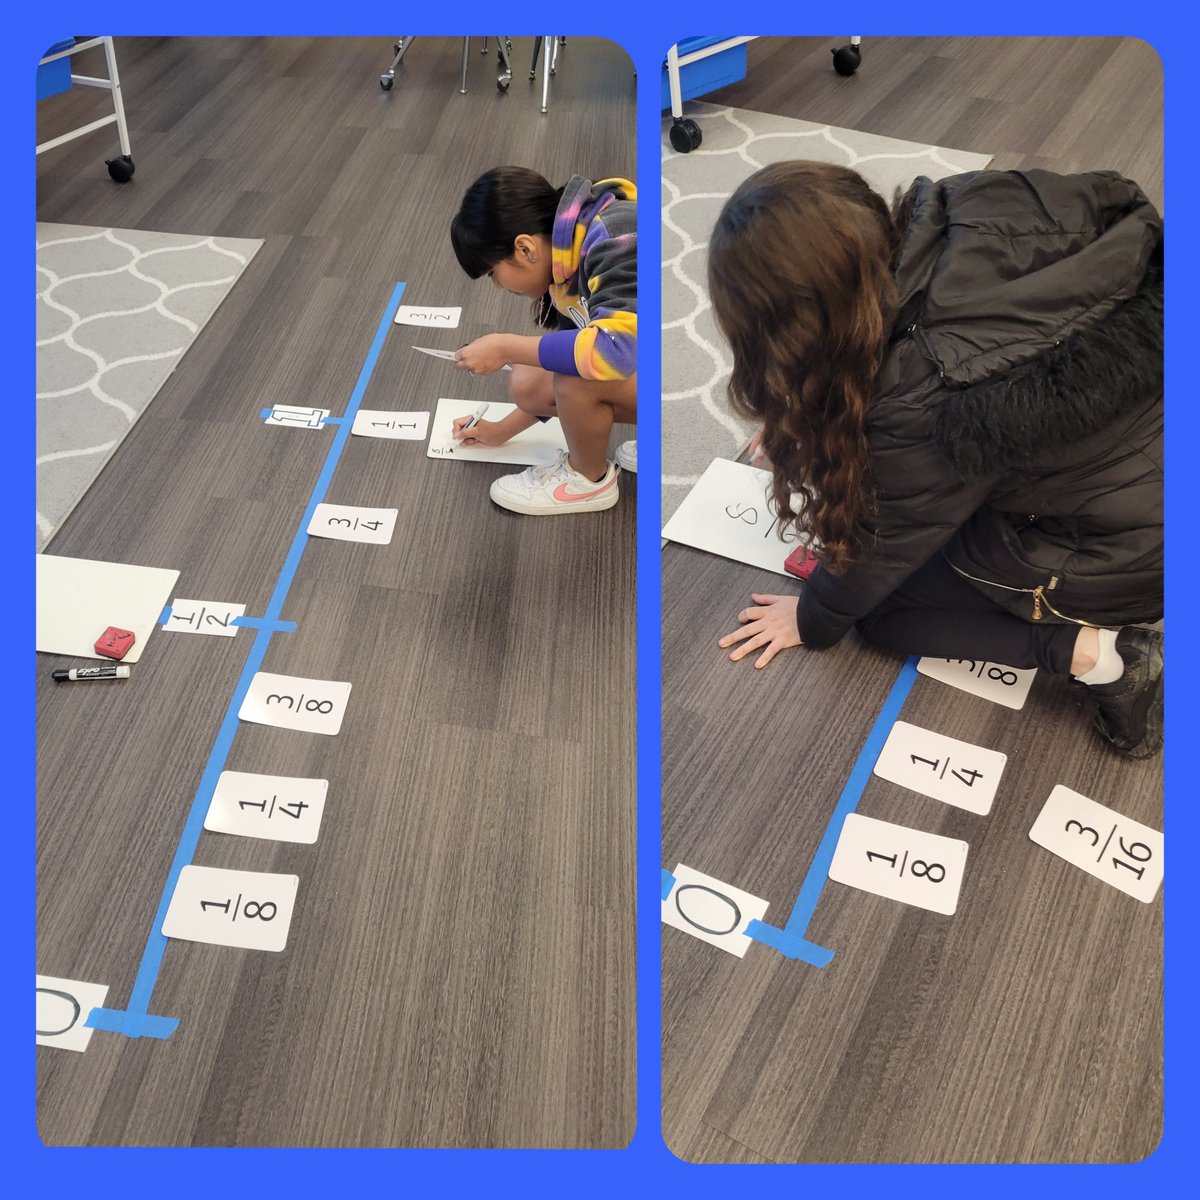 Fraction sense: Our @gheeagles #create a number line and #reflect on the placement of their fractions using Benchmark fractions (0, 1/2, 1) #risdleadandint #risdweareone